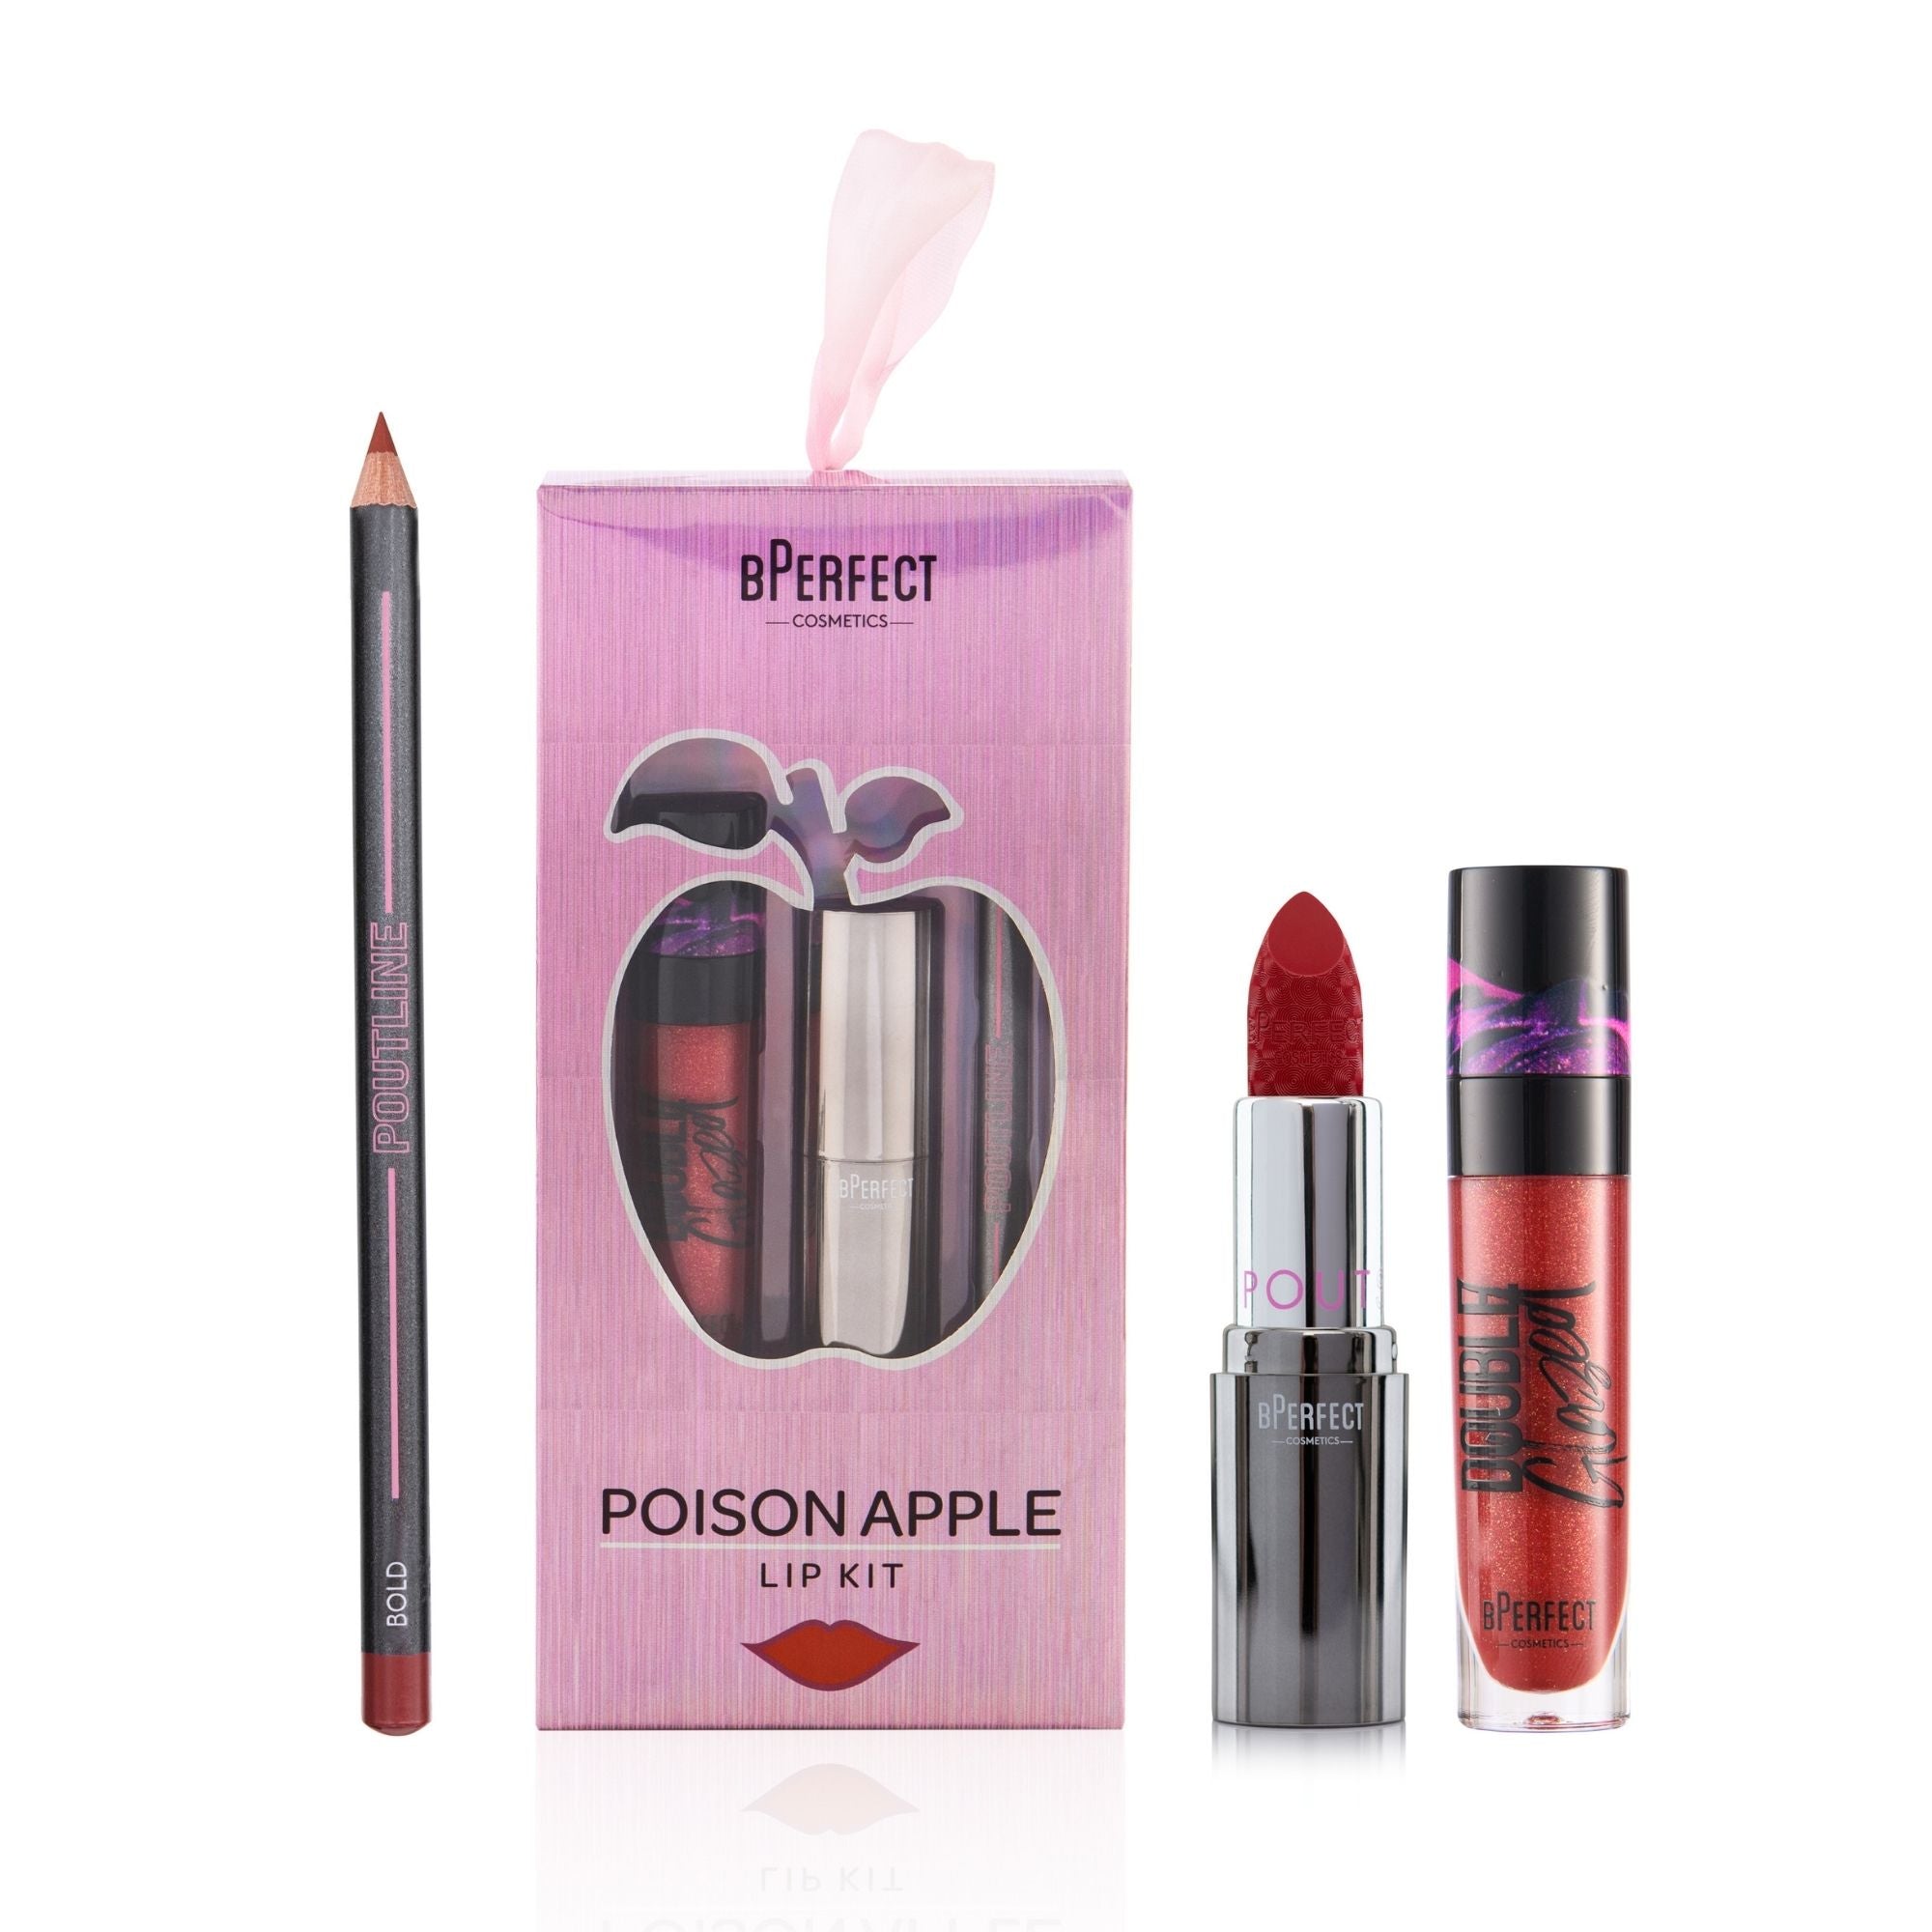 bPerfect Poison Apple Christmas Lip Kit, with packaging